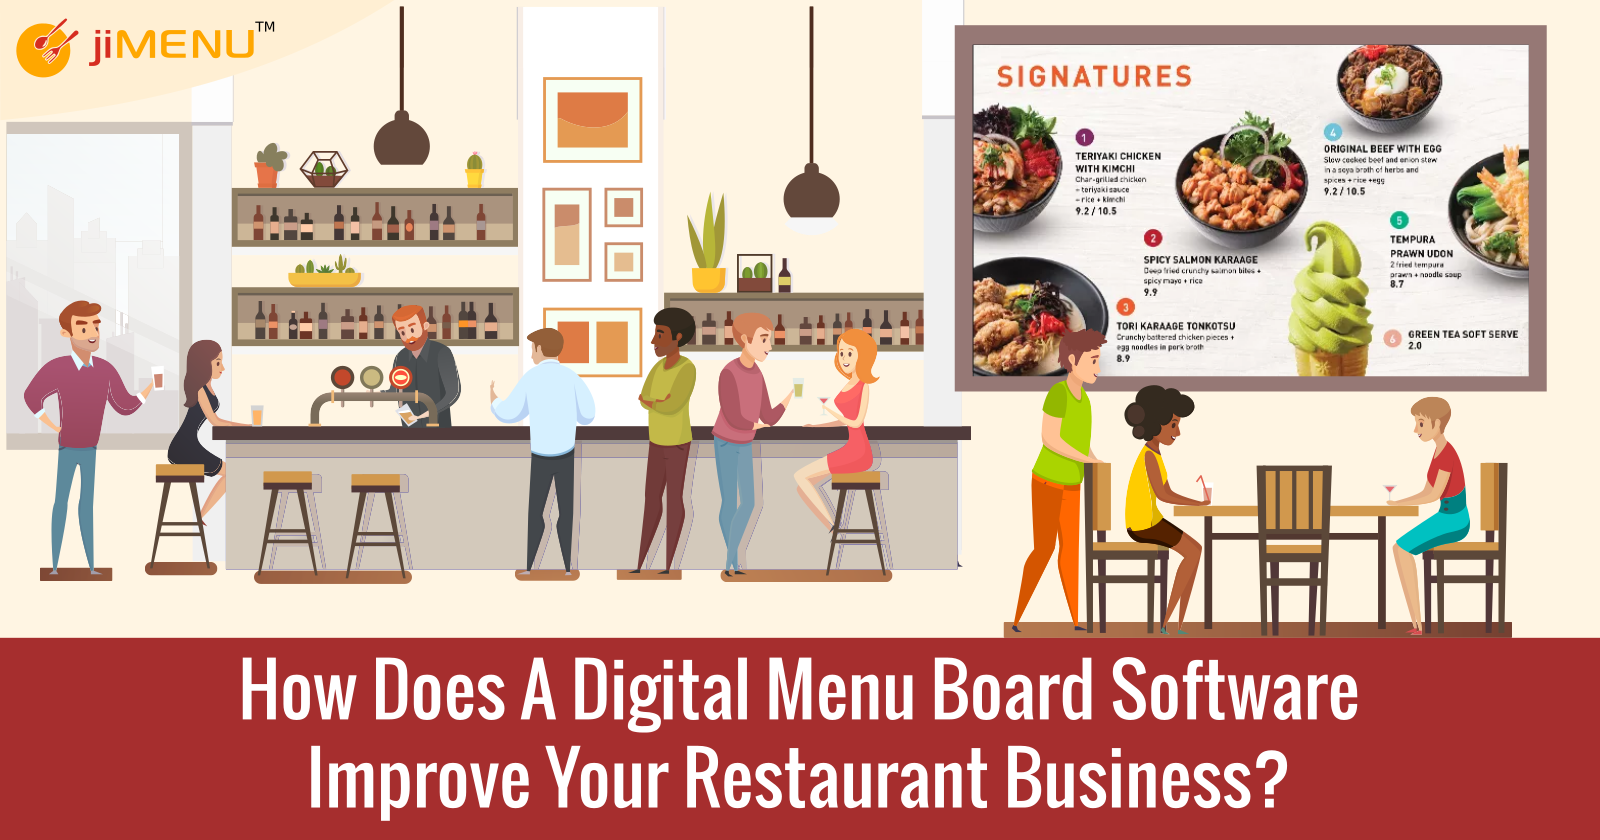 How Does A Digital Menu Board Software Improve Your Restaurant Business?